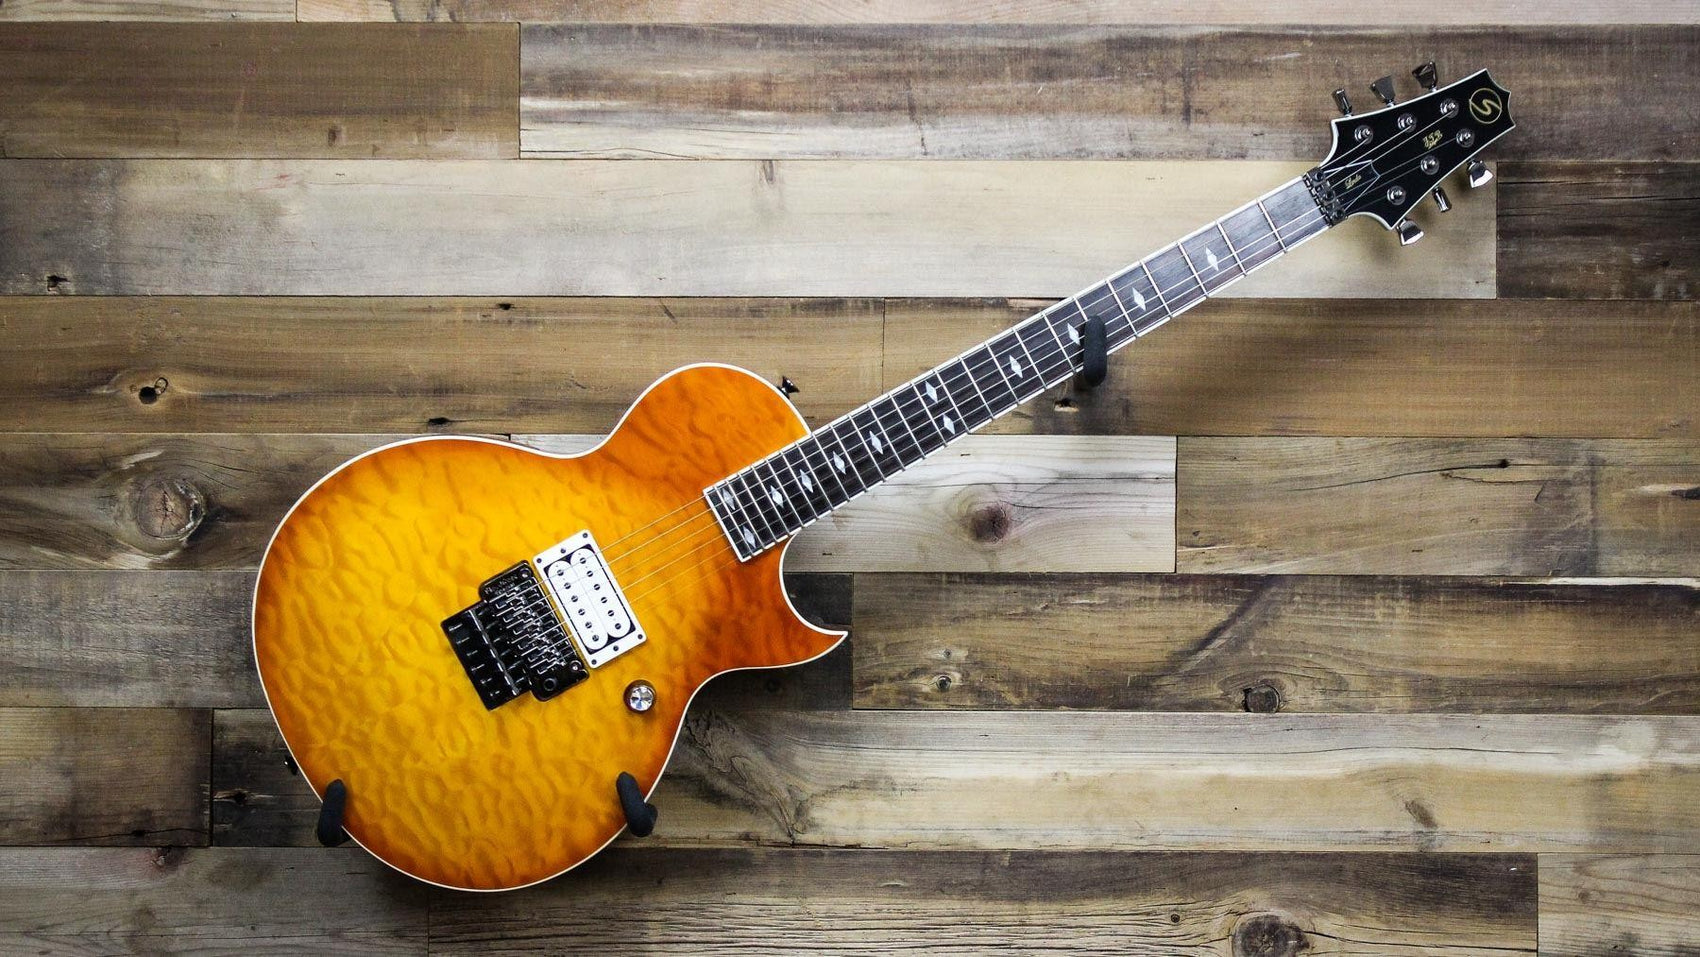 Check Out Our Fresh Batch of Used Guitars!